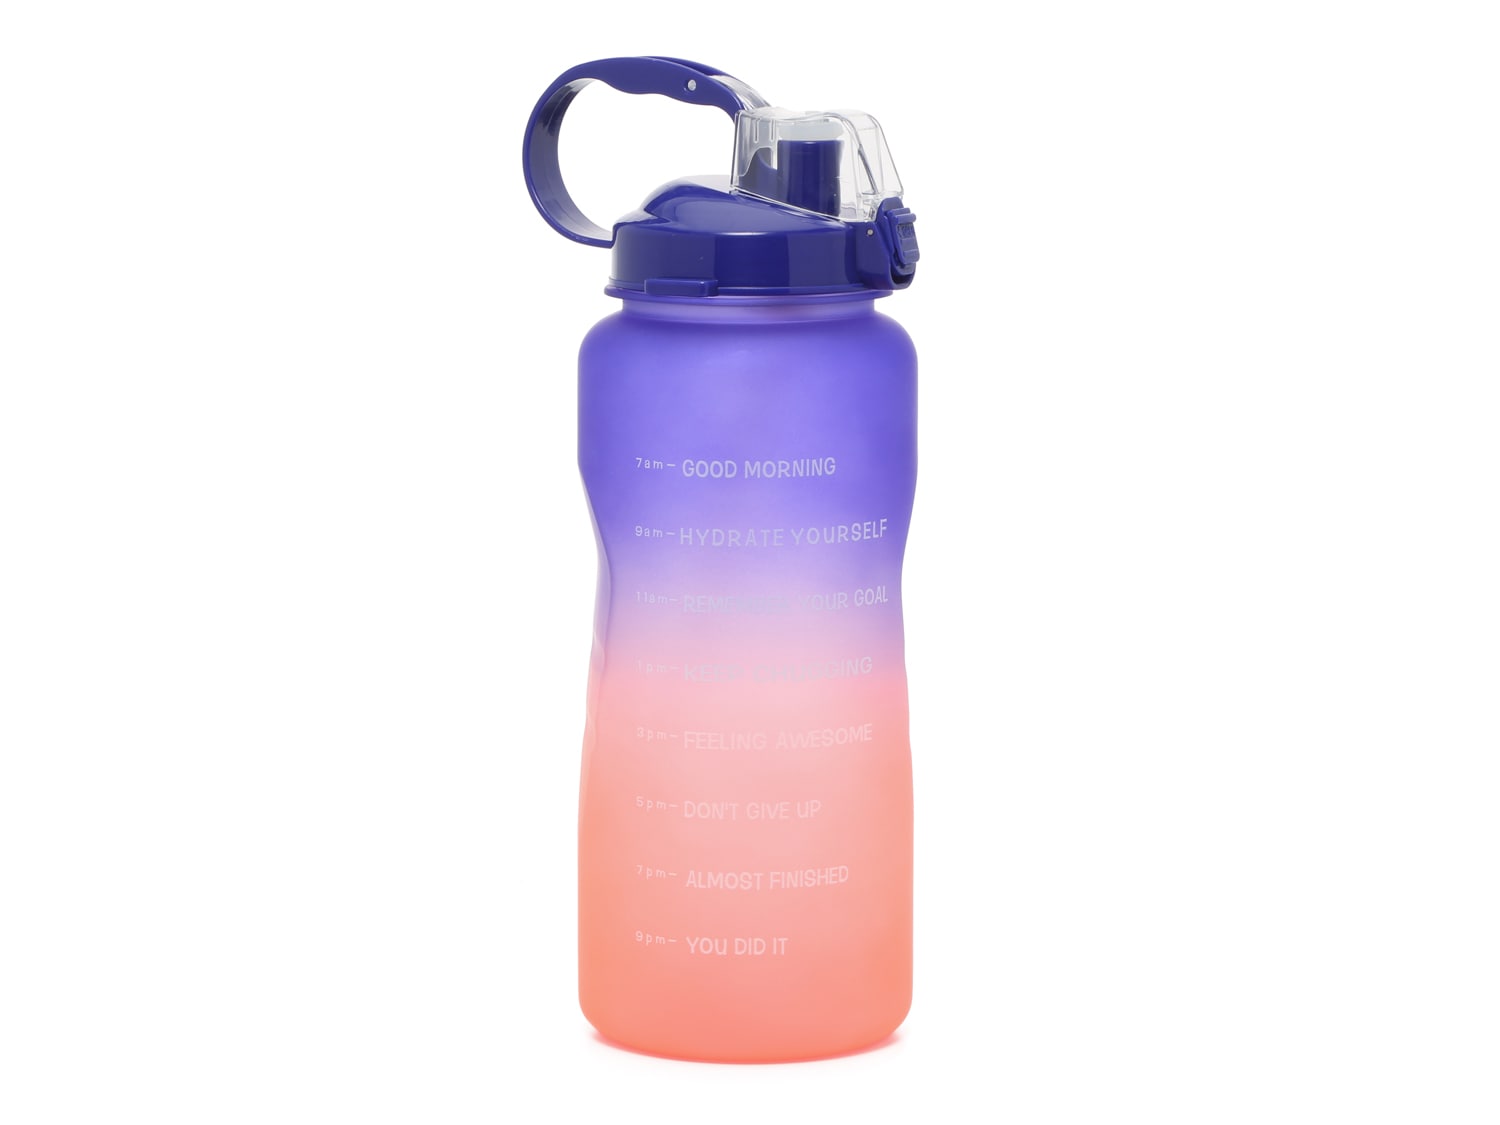 Hit your daily hydration goals with this motivational water bottle